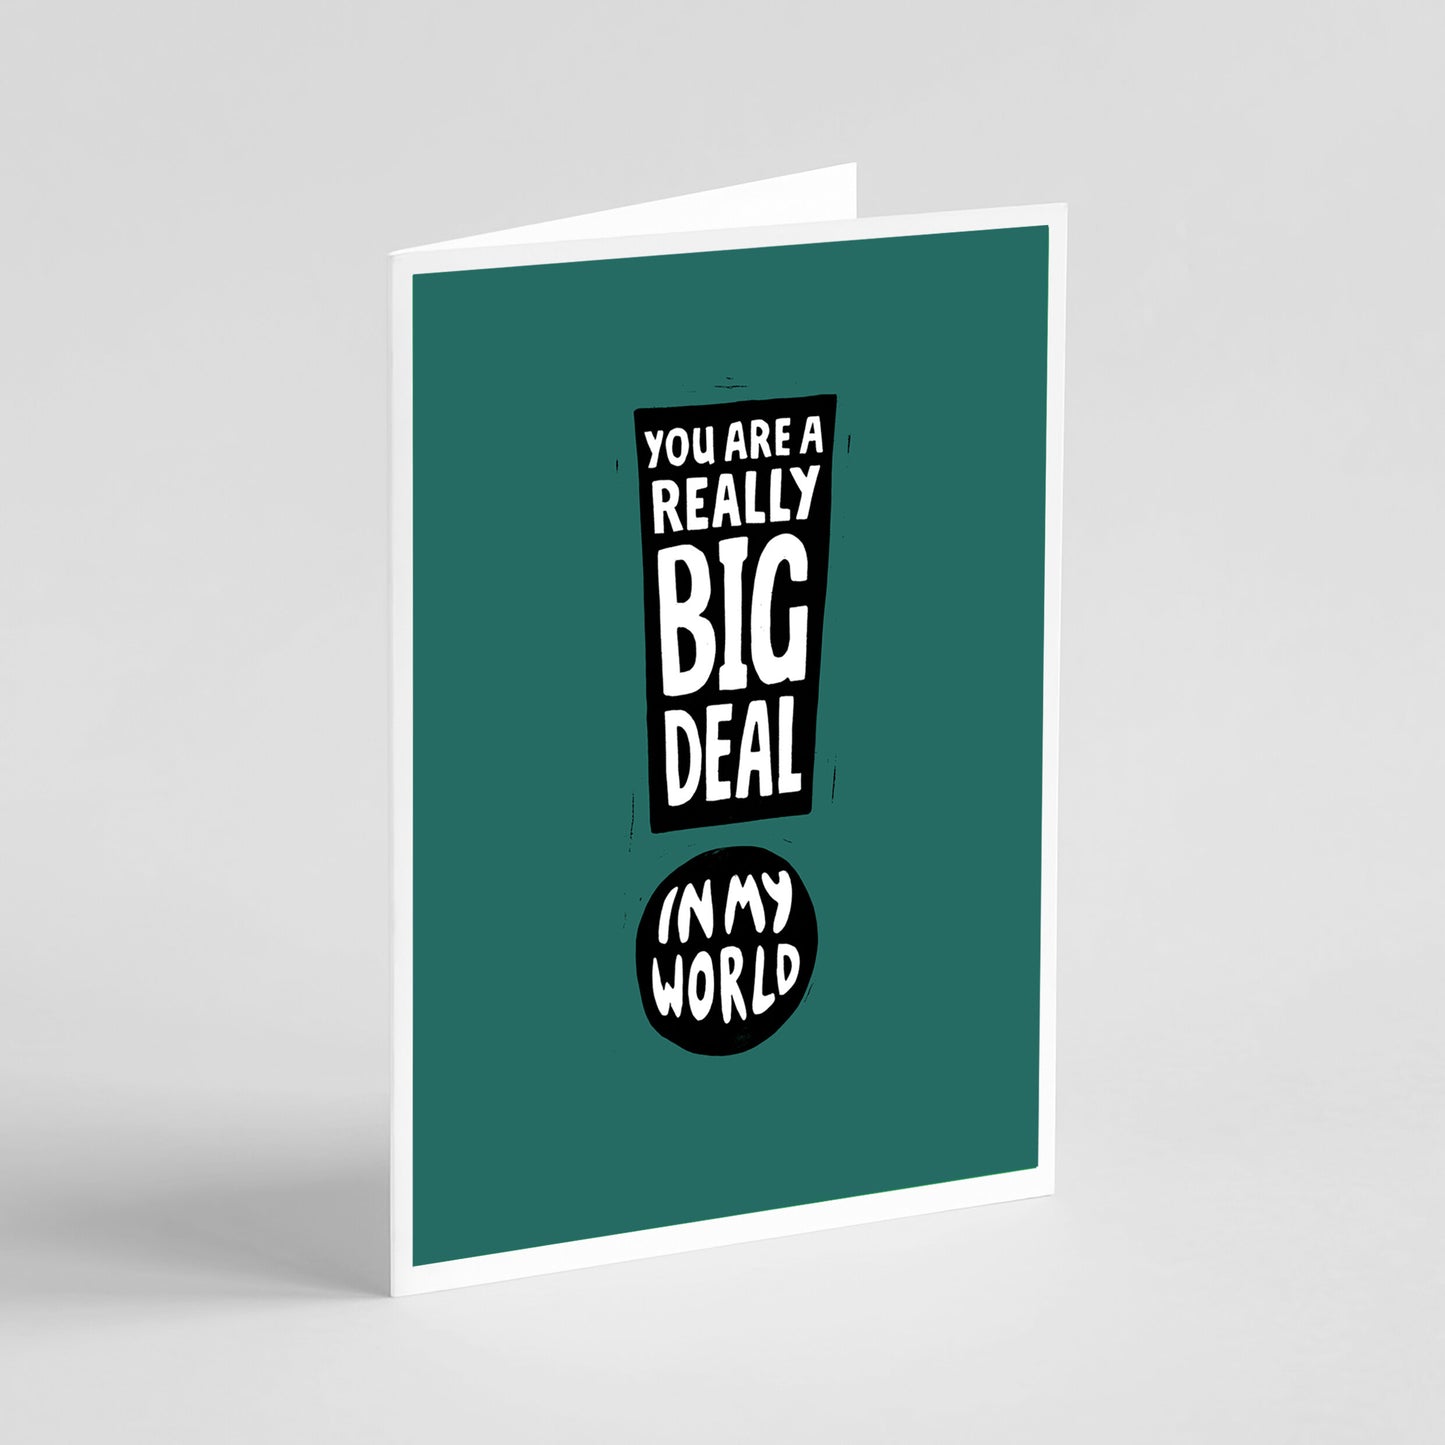 NEW - You Are A Really Big Deal In My World - Card